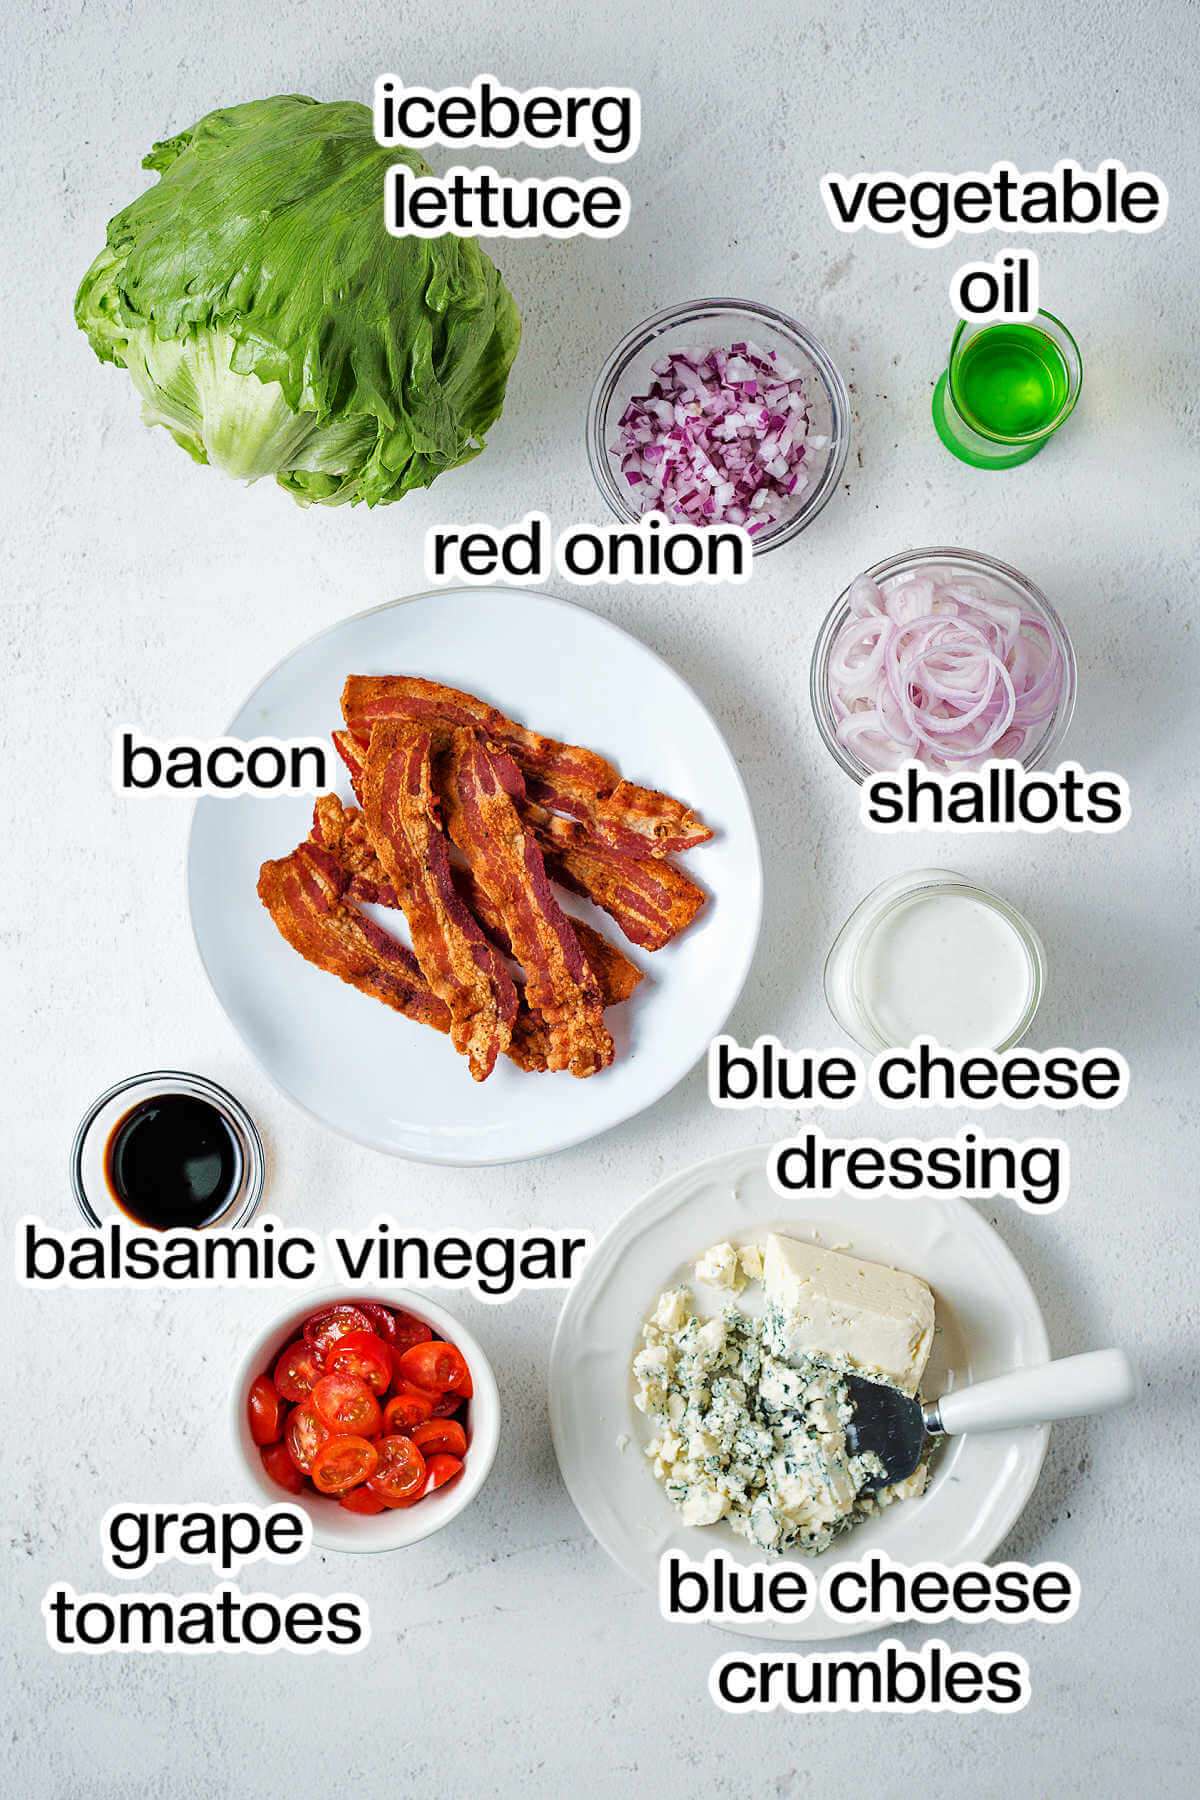 Ingredients for wedge salad on a table.